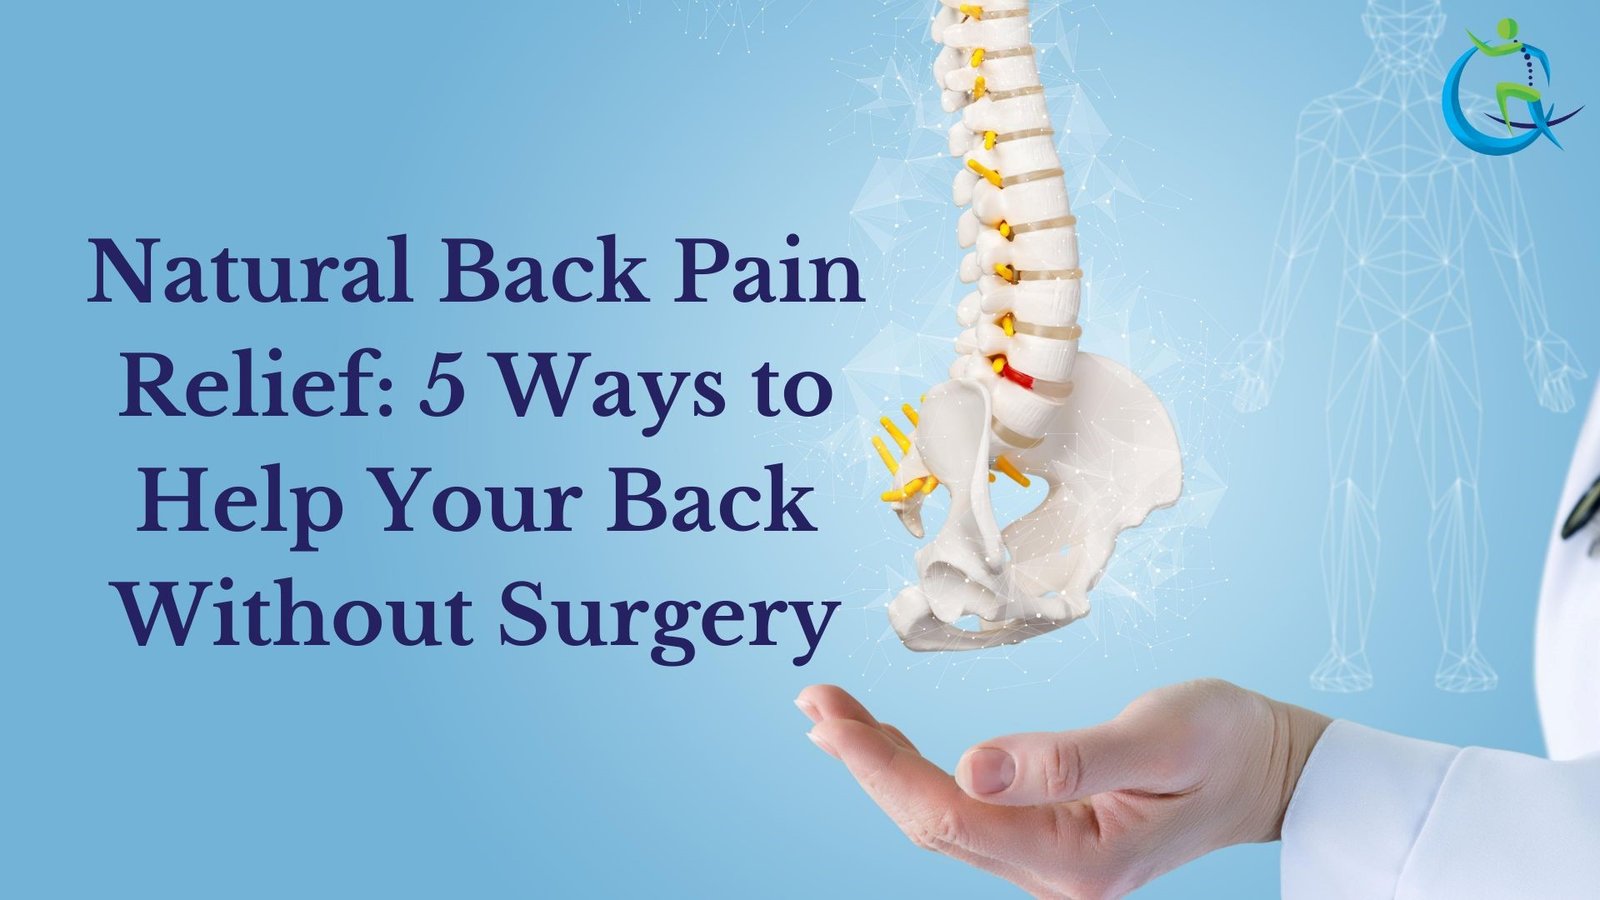 Natural Back Pain Relief: 5 Ways to Help Your Back Without Surgery